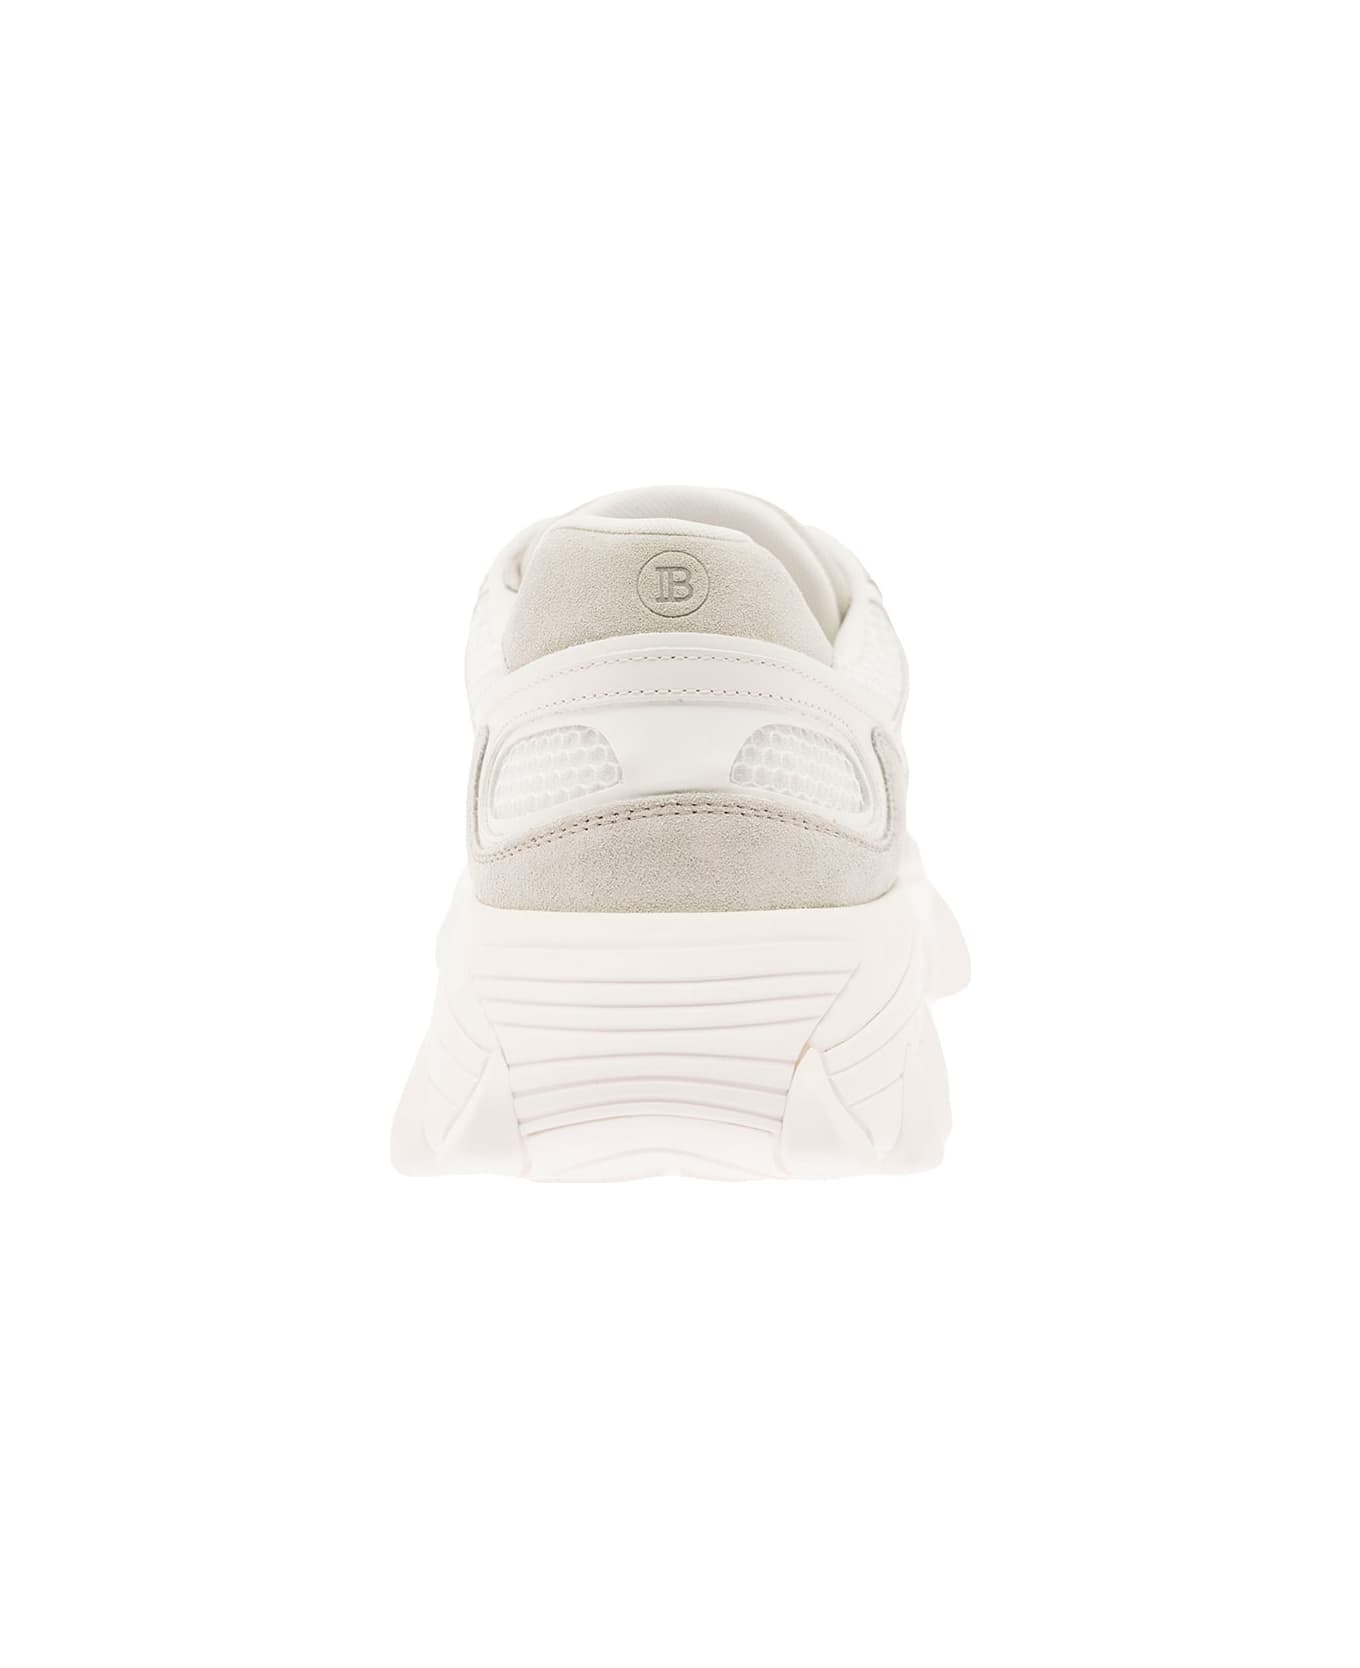 Balmain 'b-east' White Trainers With Mesh And Suede Inserts In Leather Man - White スニーカー